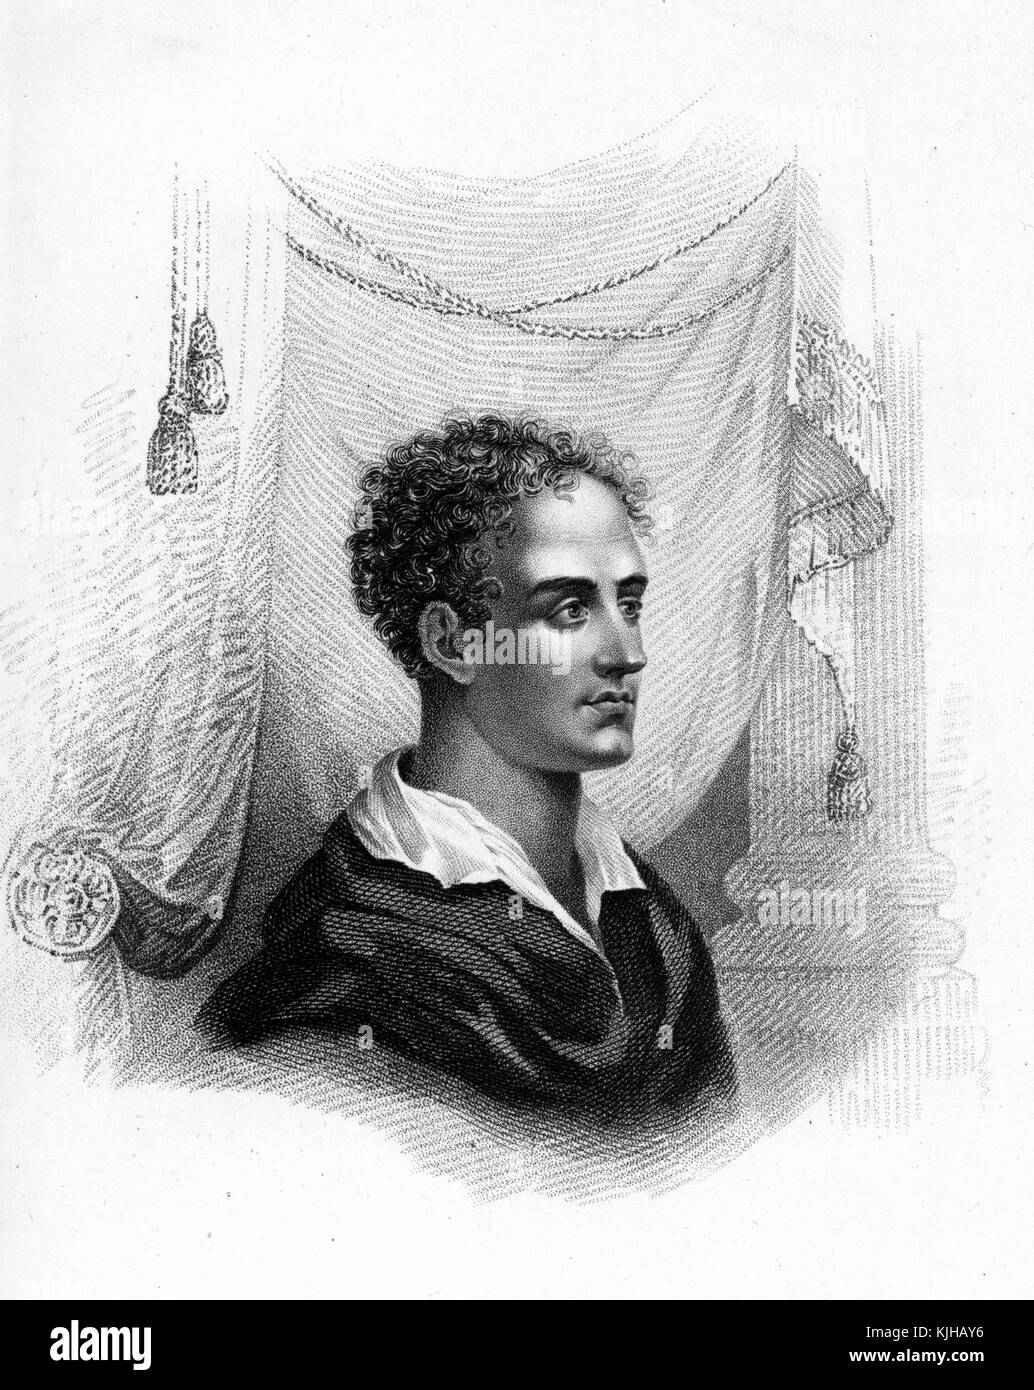 An engraving from a portrait of Lord Byron, he was an English poet whose works remain popular throughout the world, he was a prominent figure in the Romantic Movement, he was known for living in excess, stories about him surrounded his life filled with love affairs with men and women along with huge debts, he is considered a hero in Greece for fighting alongside them against the Ottoman Empire, he died at age 36, 1864. From the New York Public Library. Stock Photo